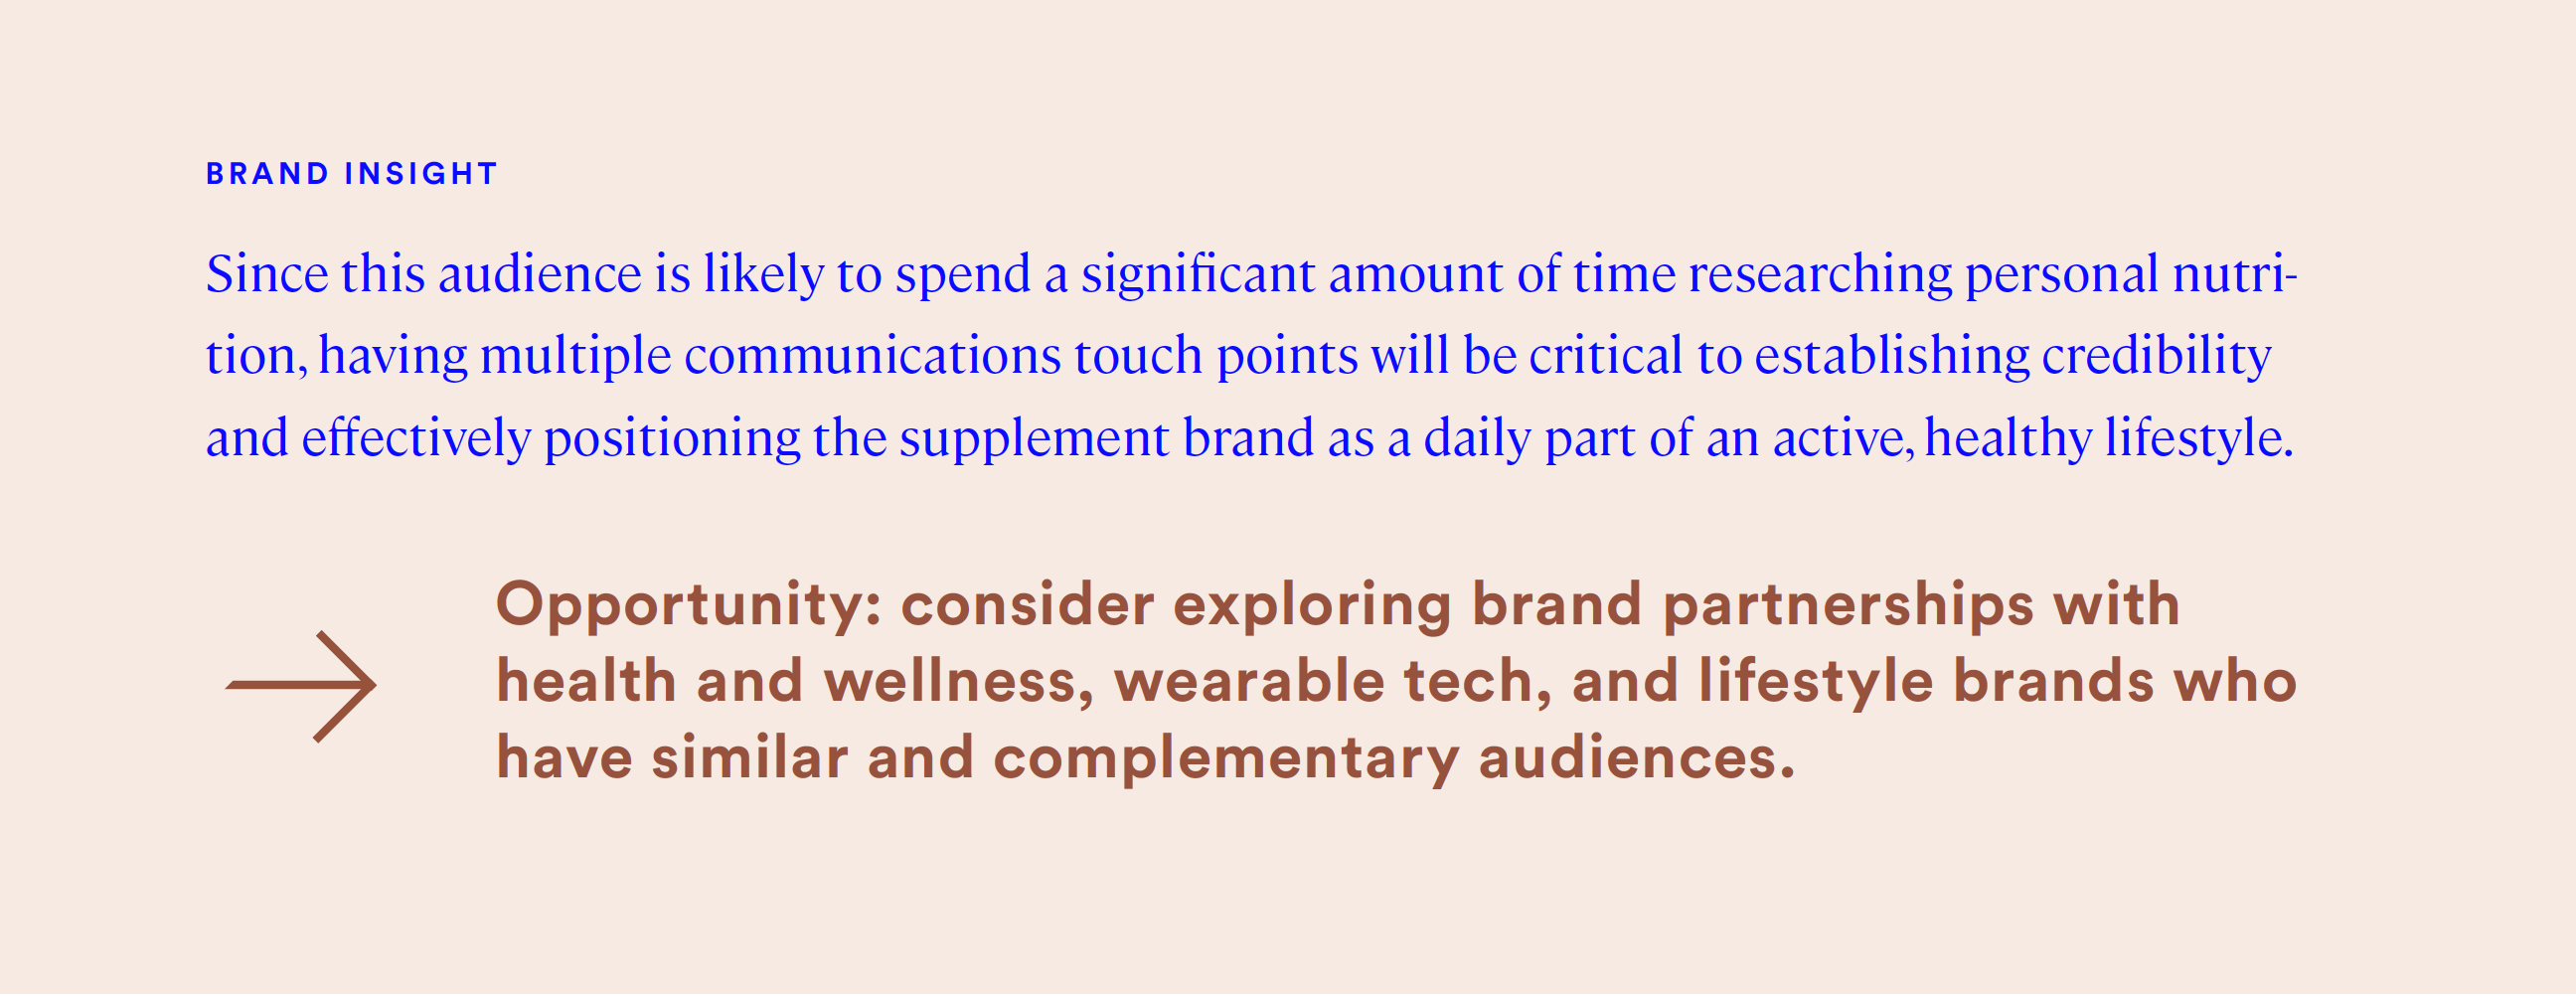 since this audience is likely to spend a significant amount of tine researching personal nutrition, having multiple communications touch points will be critical to establishing credibility and effectively positioning the supplement brand as daily part of an active, healthy lifestyle.